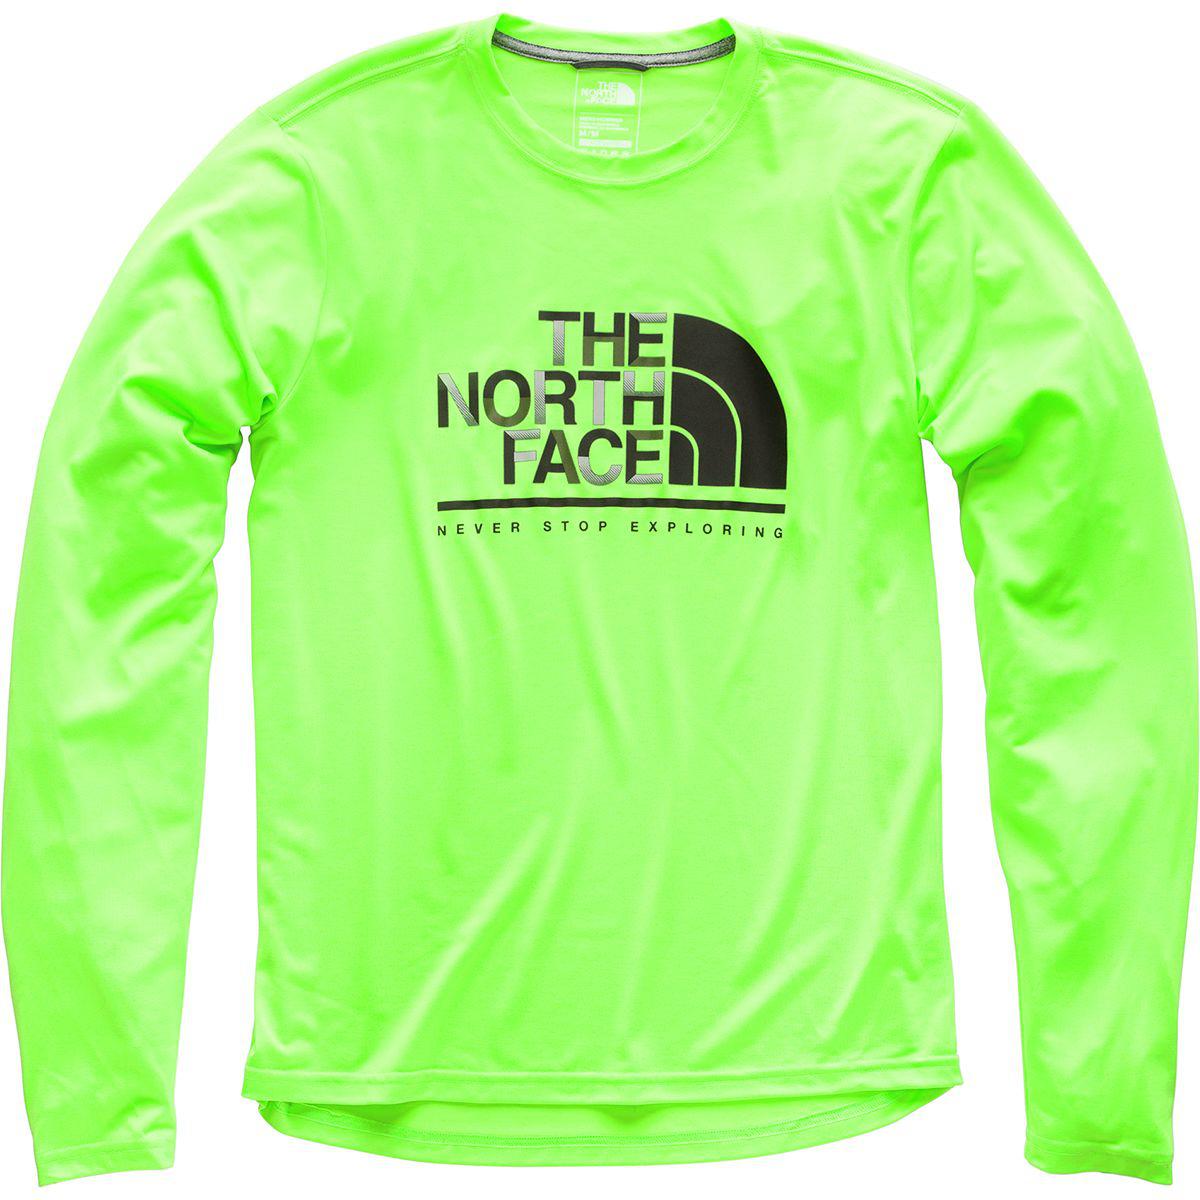 The North Face Synthetic Reaxion T-shirt in Green for Men - Lyst